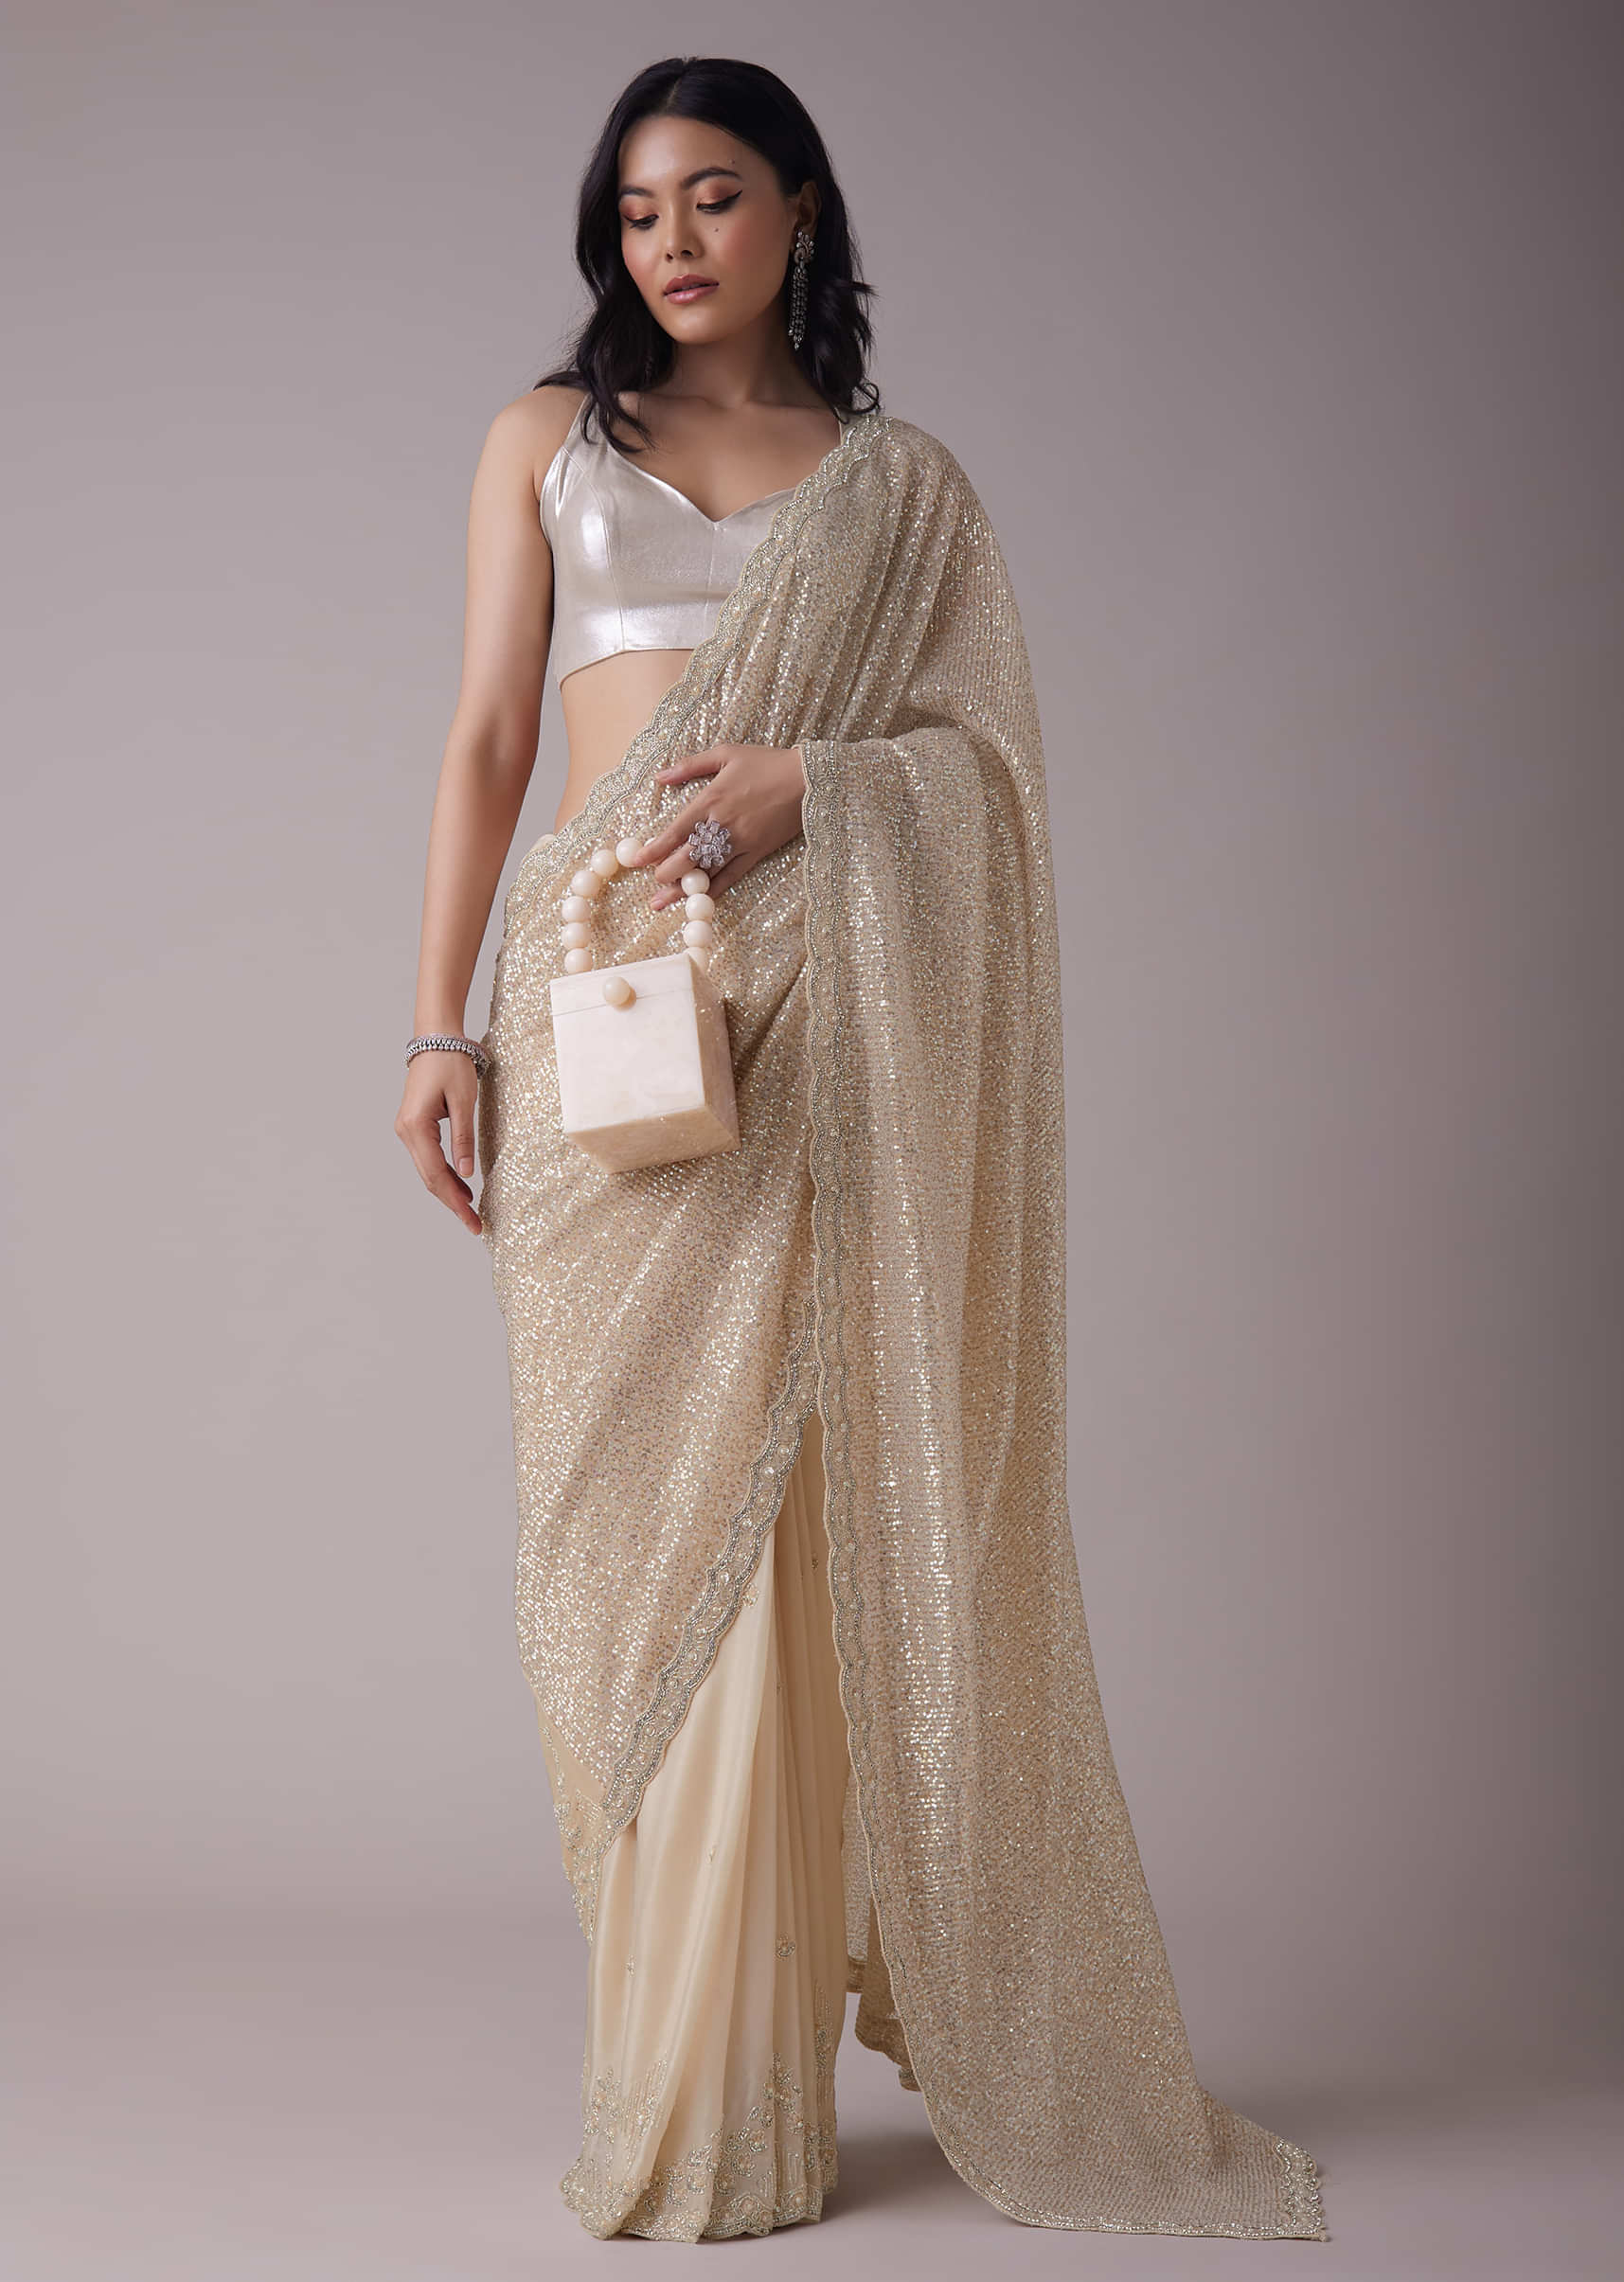 Gold Sequins Saree With An Embellished Border